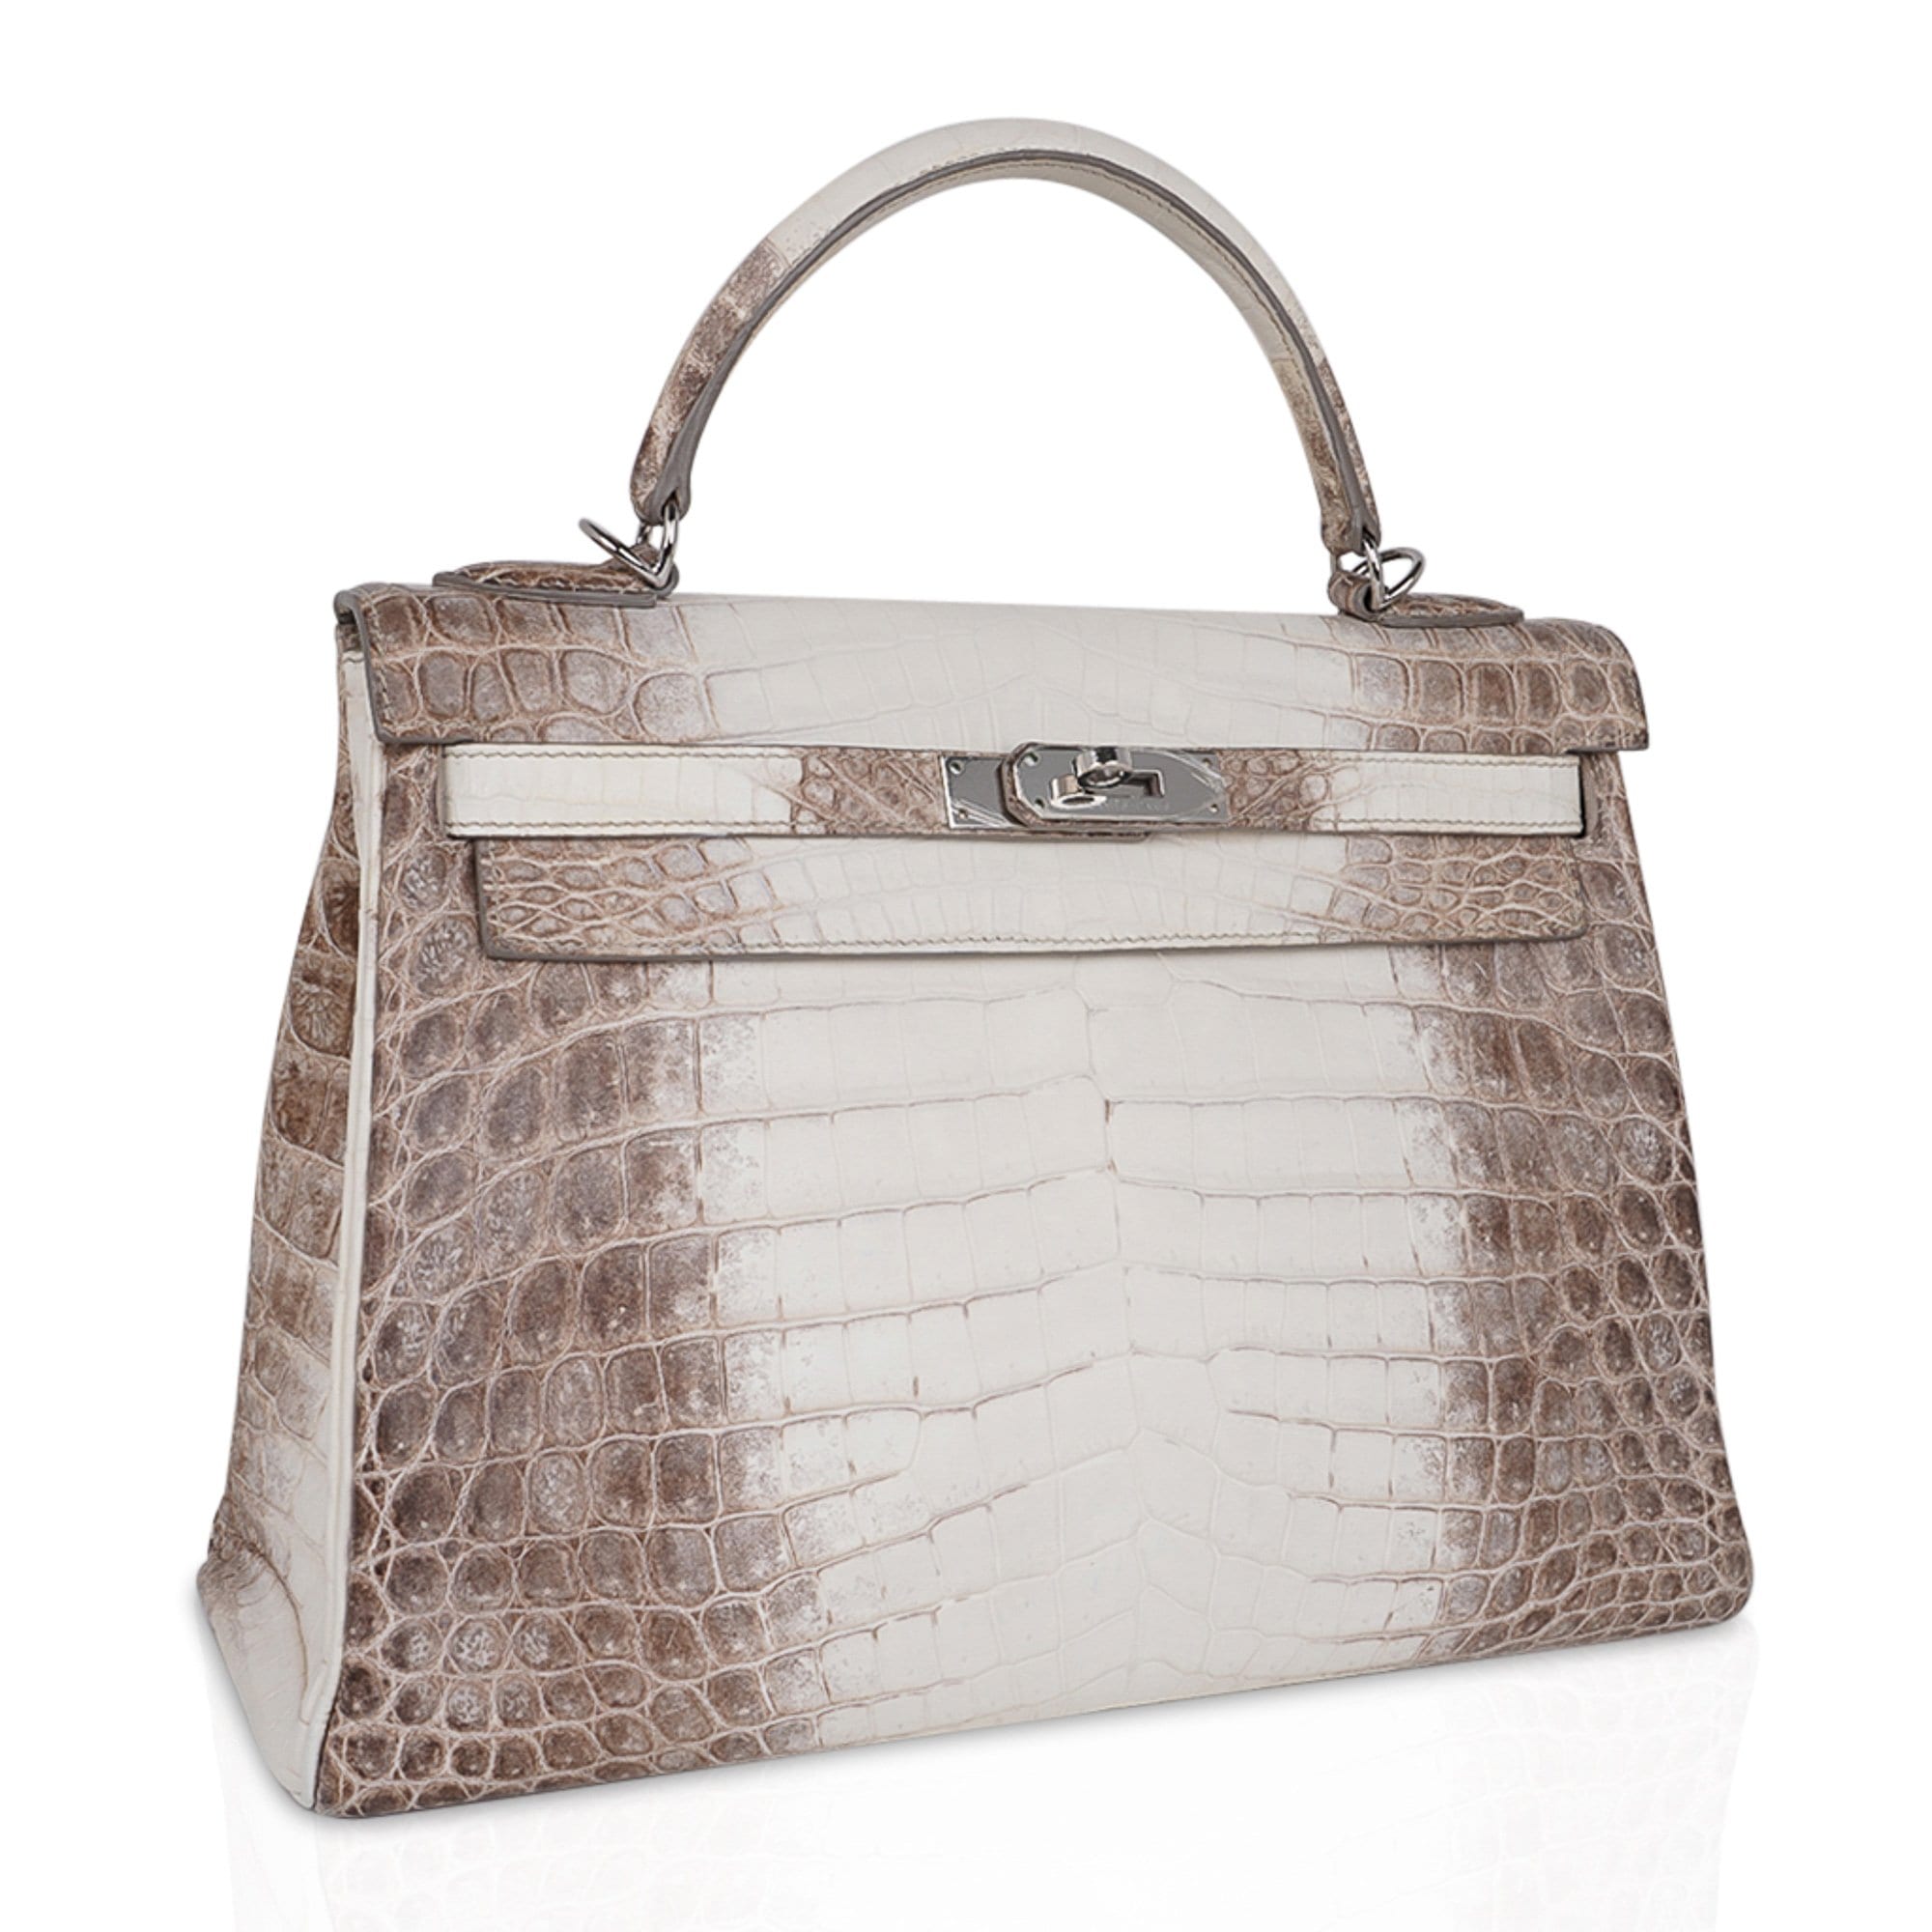 The Latest Handbag Kelly Himalayan Crocodile Silver Hardware Trends: Hip or  Hype?, by Nadinecollectionss